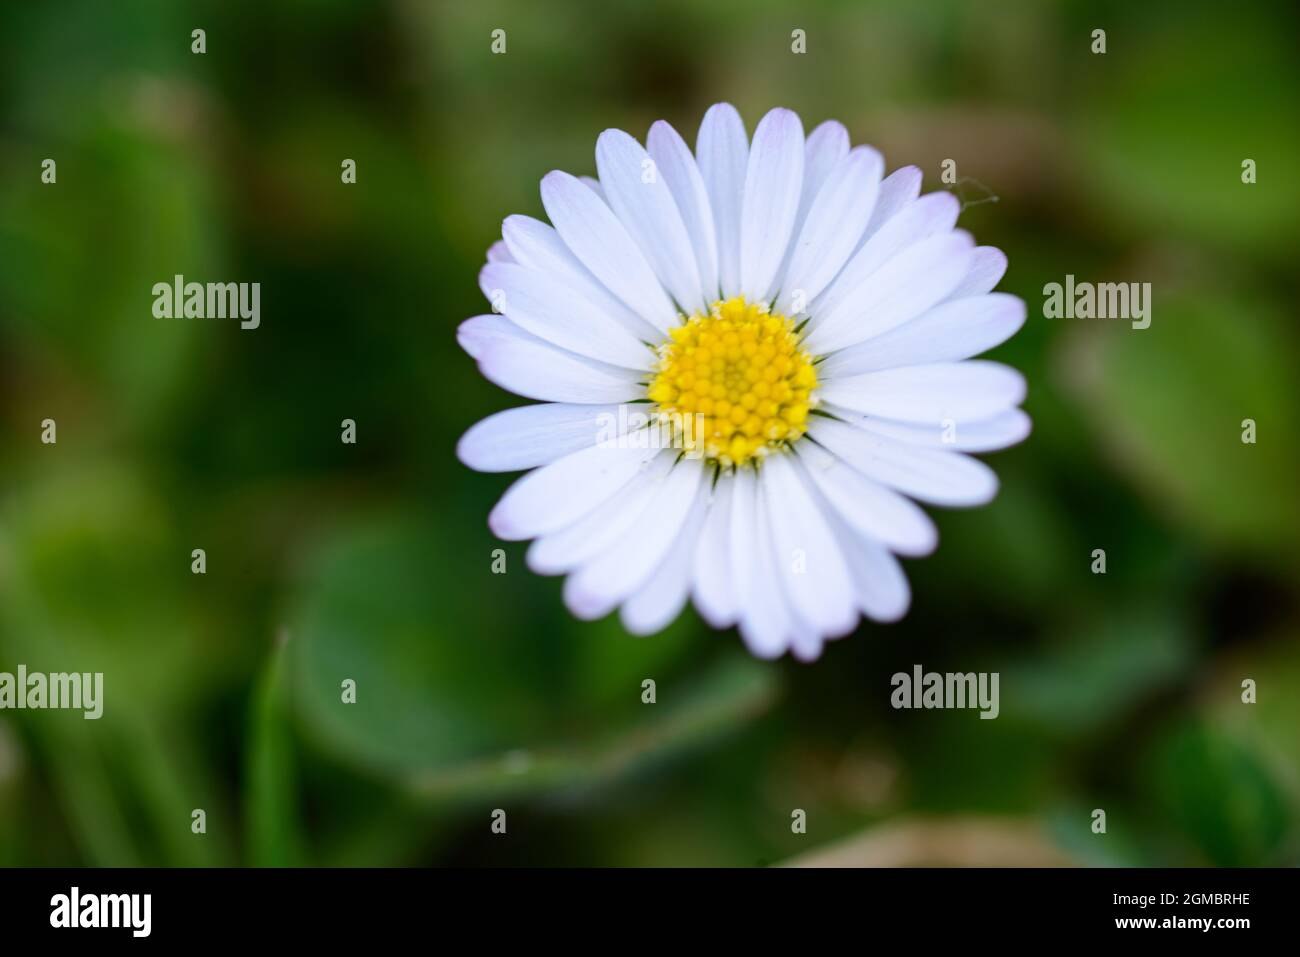 white flower on a green blurred background Stock Photo